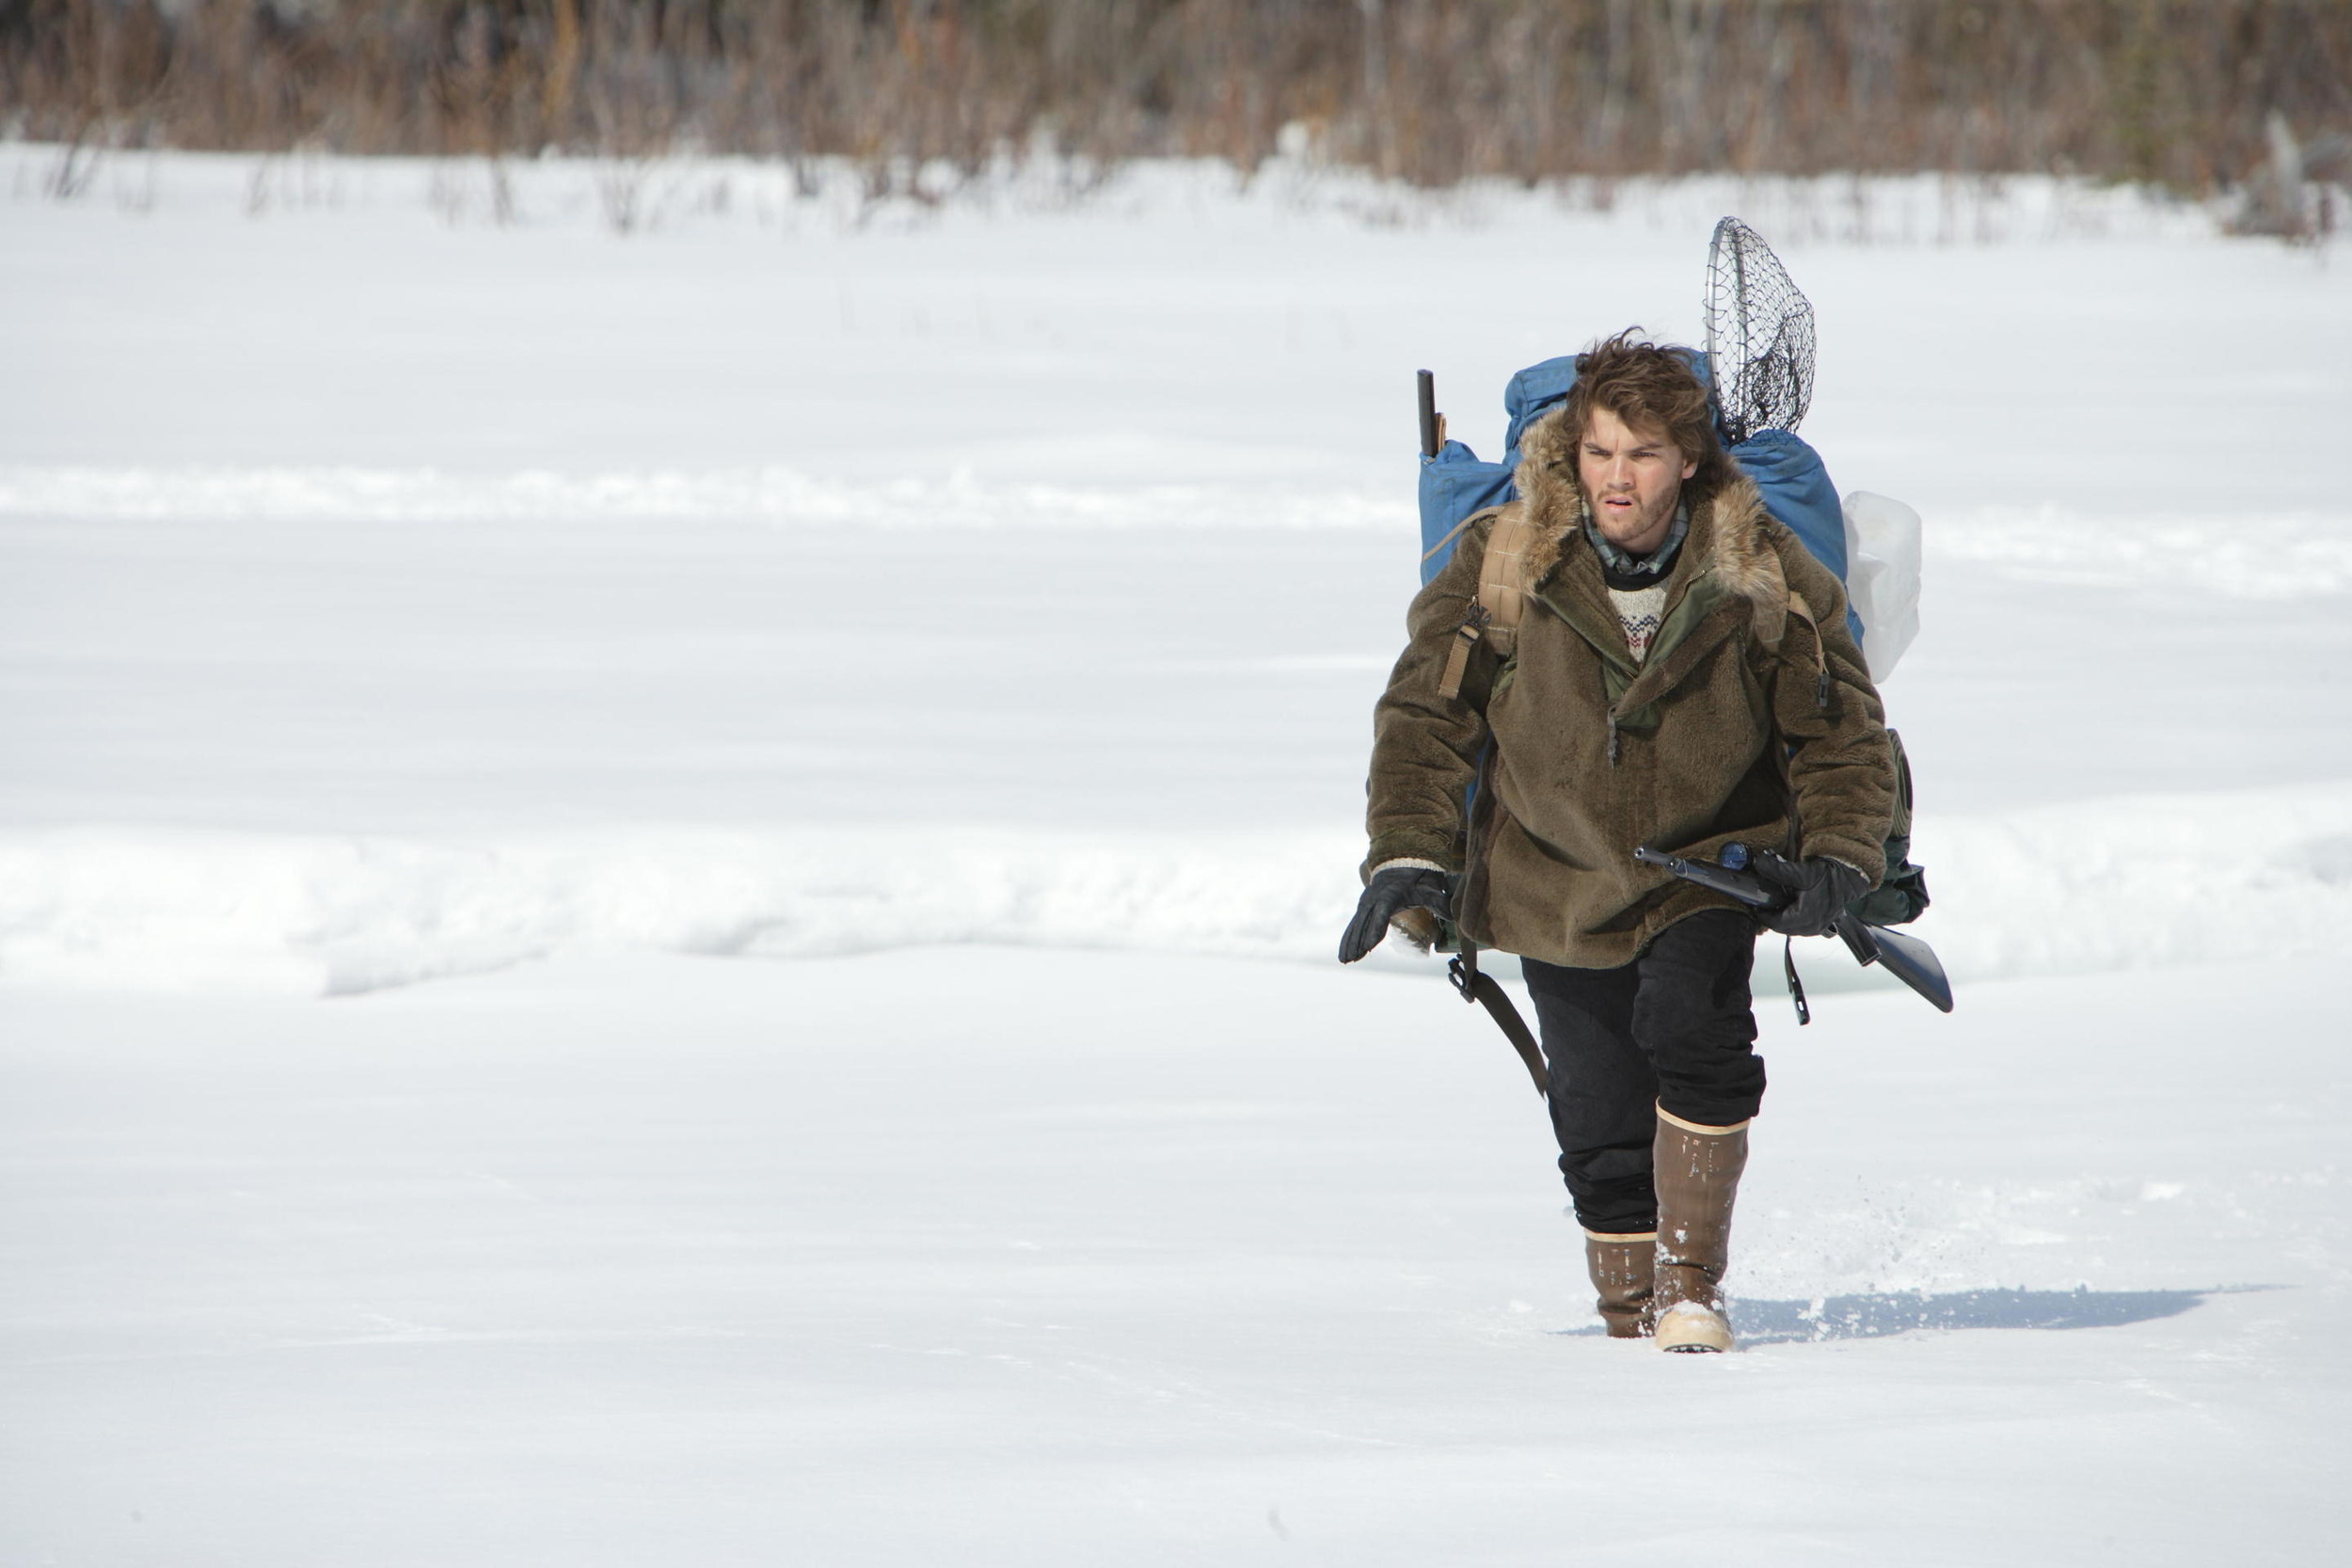 <p>If you haven’t seen the movie, perhaps you’ve read the book. <em>Into the Wild</em> was adapted by Sean Penn to screen from the book of the same name, and the story follows a man as he hikes into the Alaskan wilderness. It might not sound compelling, but we promise it is. </p><p><a href='https://www.msn.com/en-us/community/channel/vid-cj9pqbr0vn9in2b6ddcd8sfgpfq6x6utp44fssrv6mc2gtybw0us'>Follow us on MSN to see more of our exclusive entertainment content.</a></p>